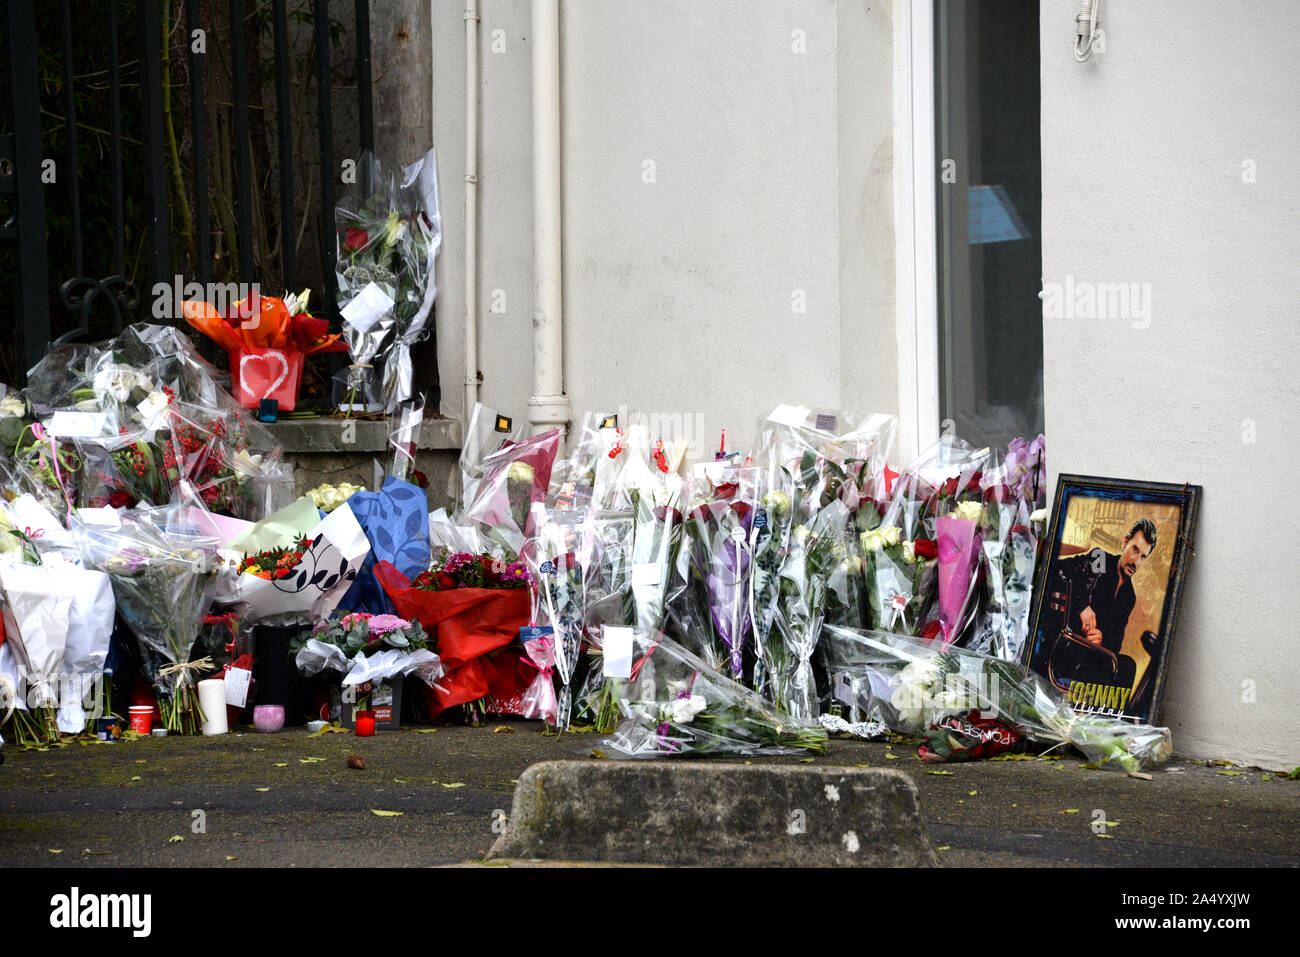 December 7th, 2017 - Marnes La Coquette  Johnny Hallyday died at 74 on December 6th at his home in Marnes La Coquette, the day after fans and medias are still outside his house to pay tribute to the singer. Stock Photo